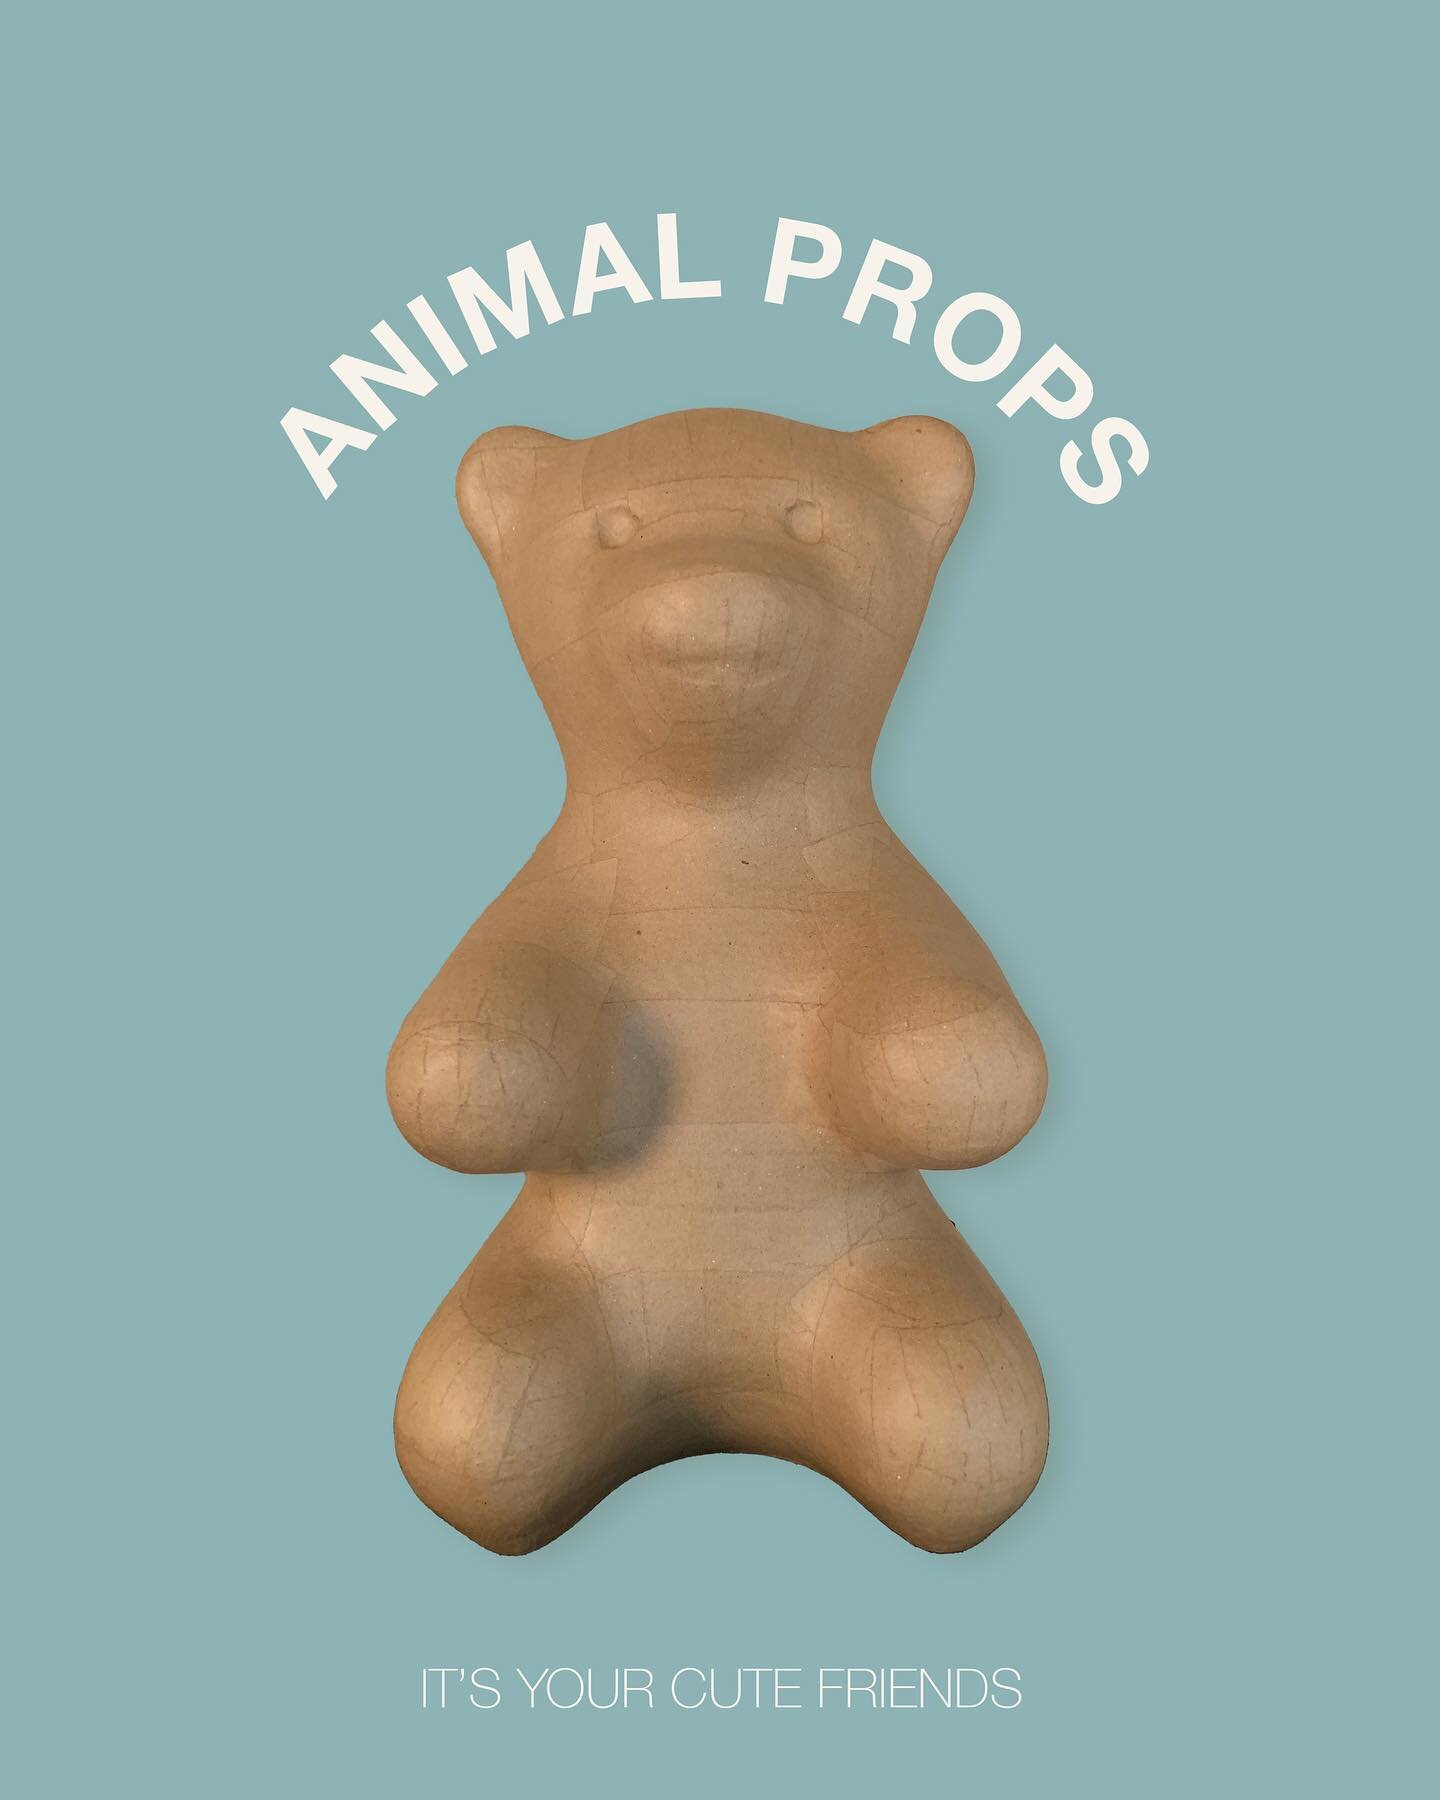 Need animal friends?🧸
Have your own animal friends for your brand and window display!
Various materials, sizes can be customed🧶🧵
Contact us to find out yours
.
.
.
#mannequin #dressform #animalart #teddybear #fixture #sculptureart #windowdisplay #